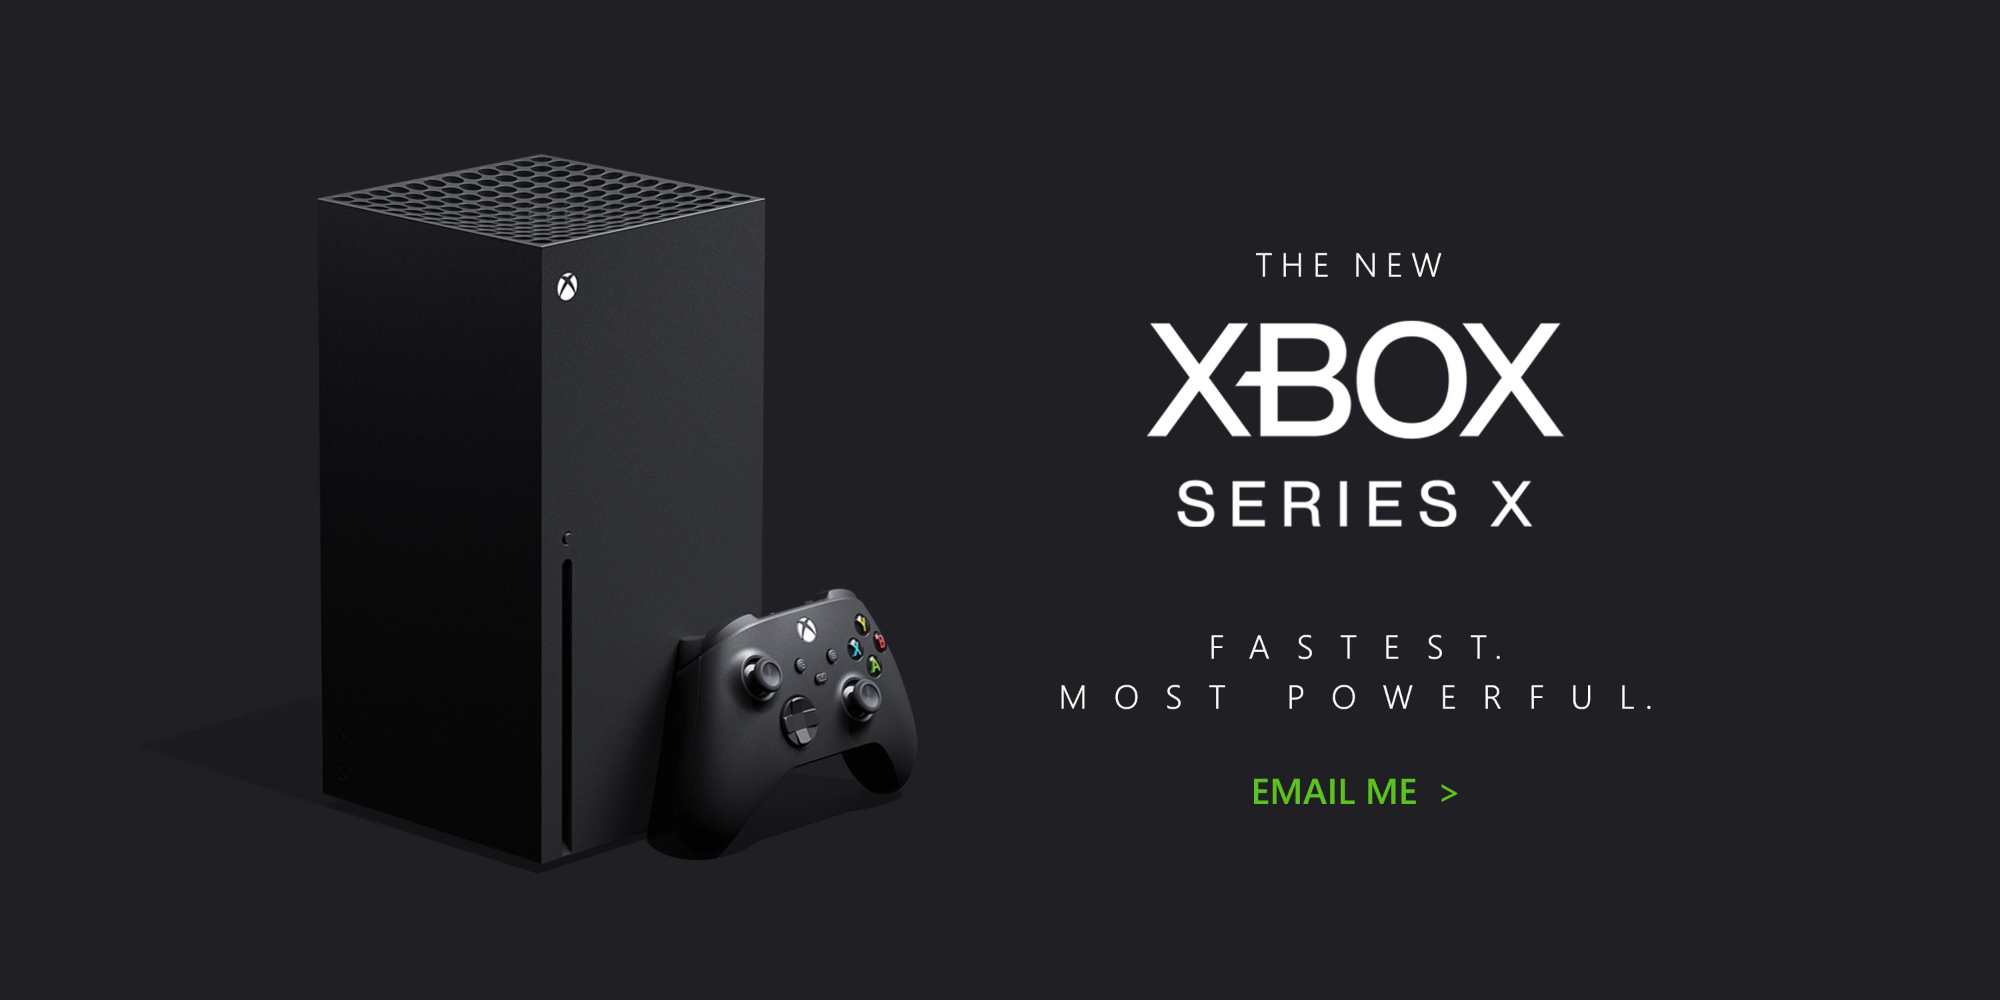 xbox series x next wave of pre orders